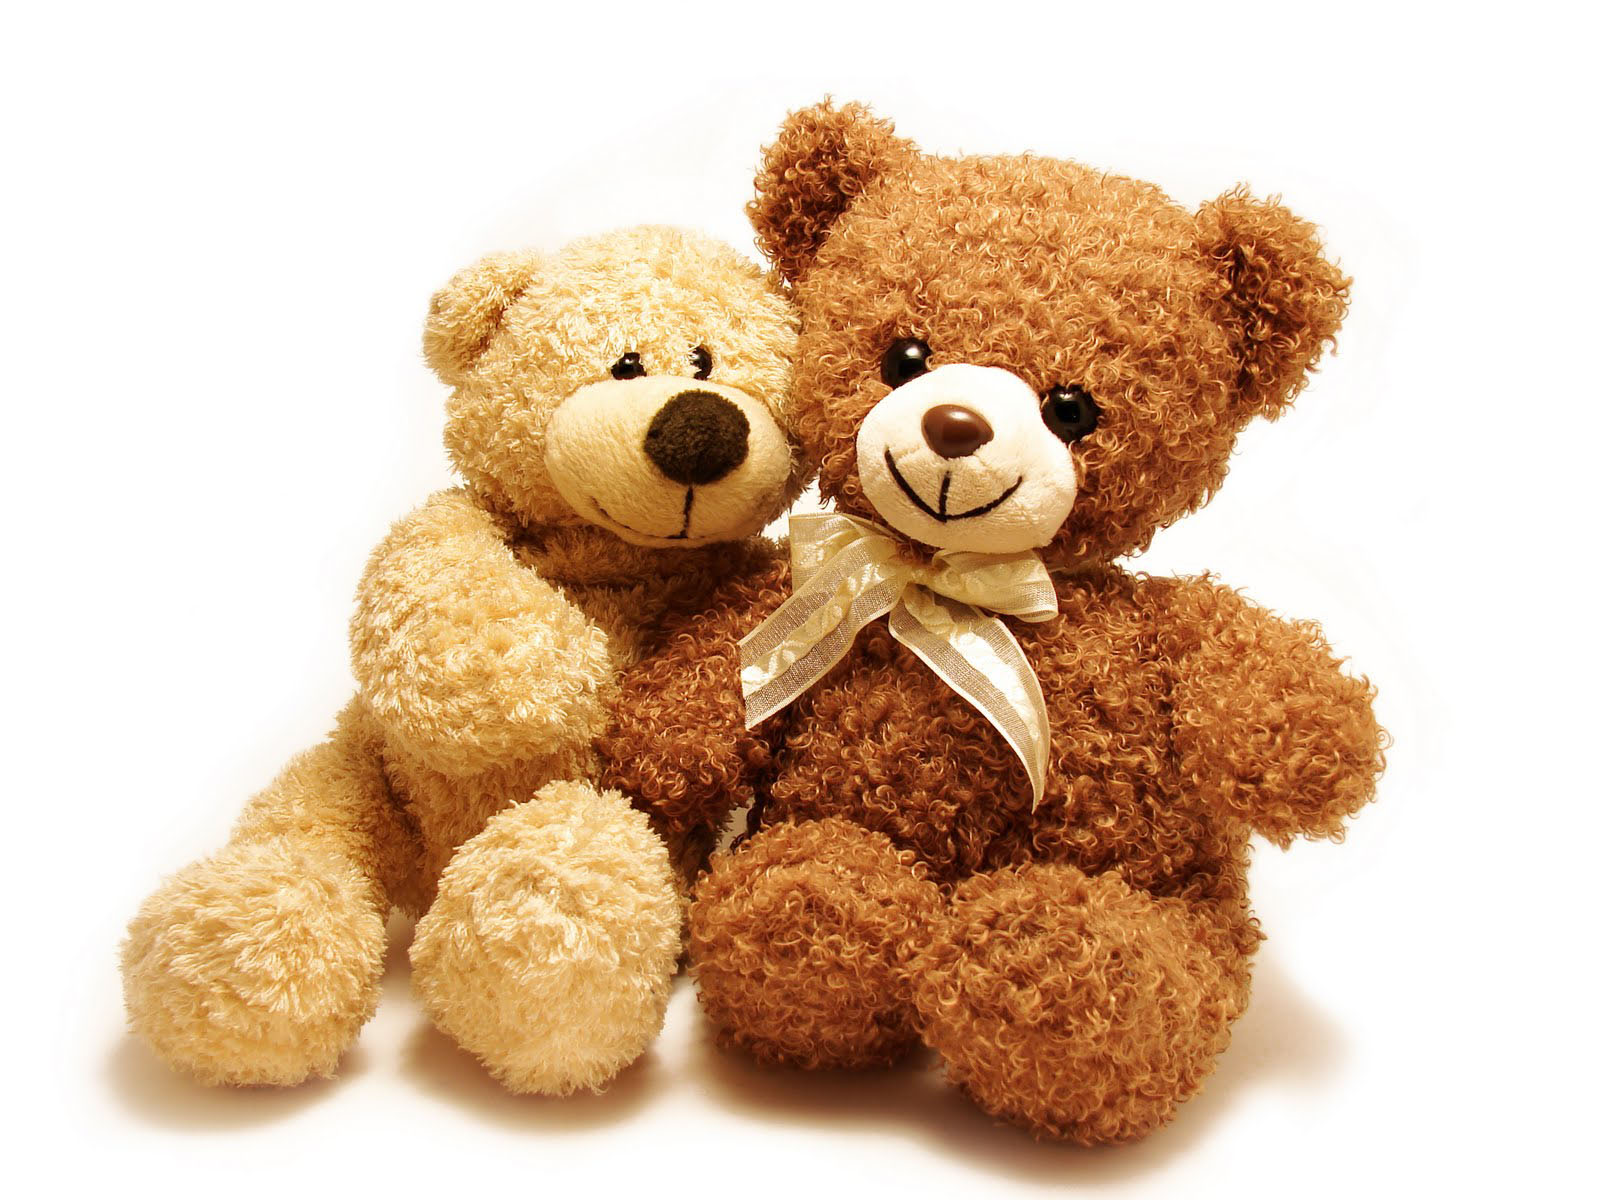 Tag Teddy Bear Wallpaper Image Photos And Pictures For